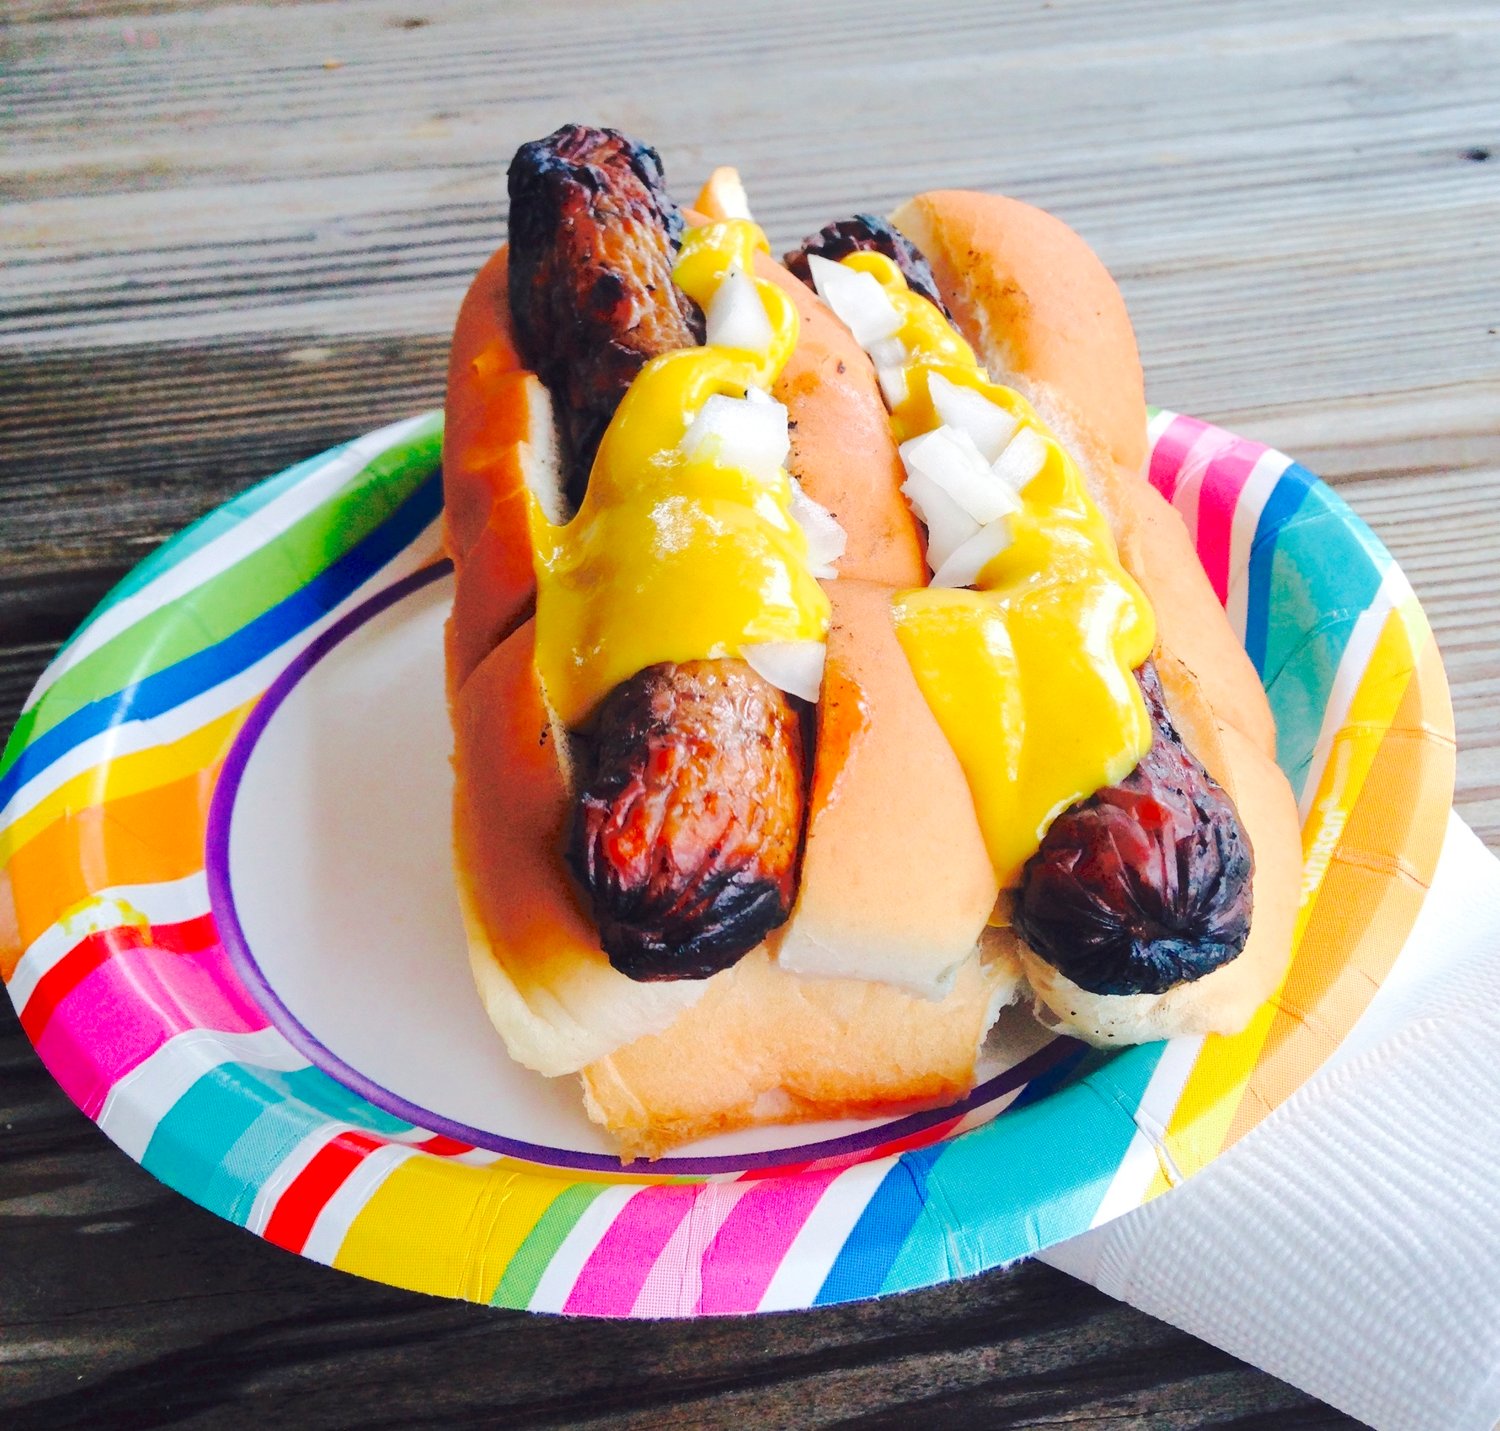 CLASSIC — Yellow mustard on top of a pair of grilled hotdogs.